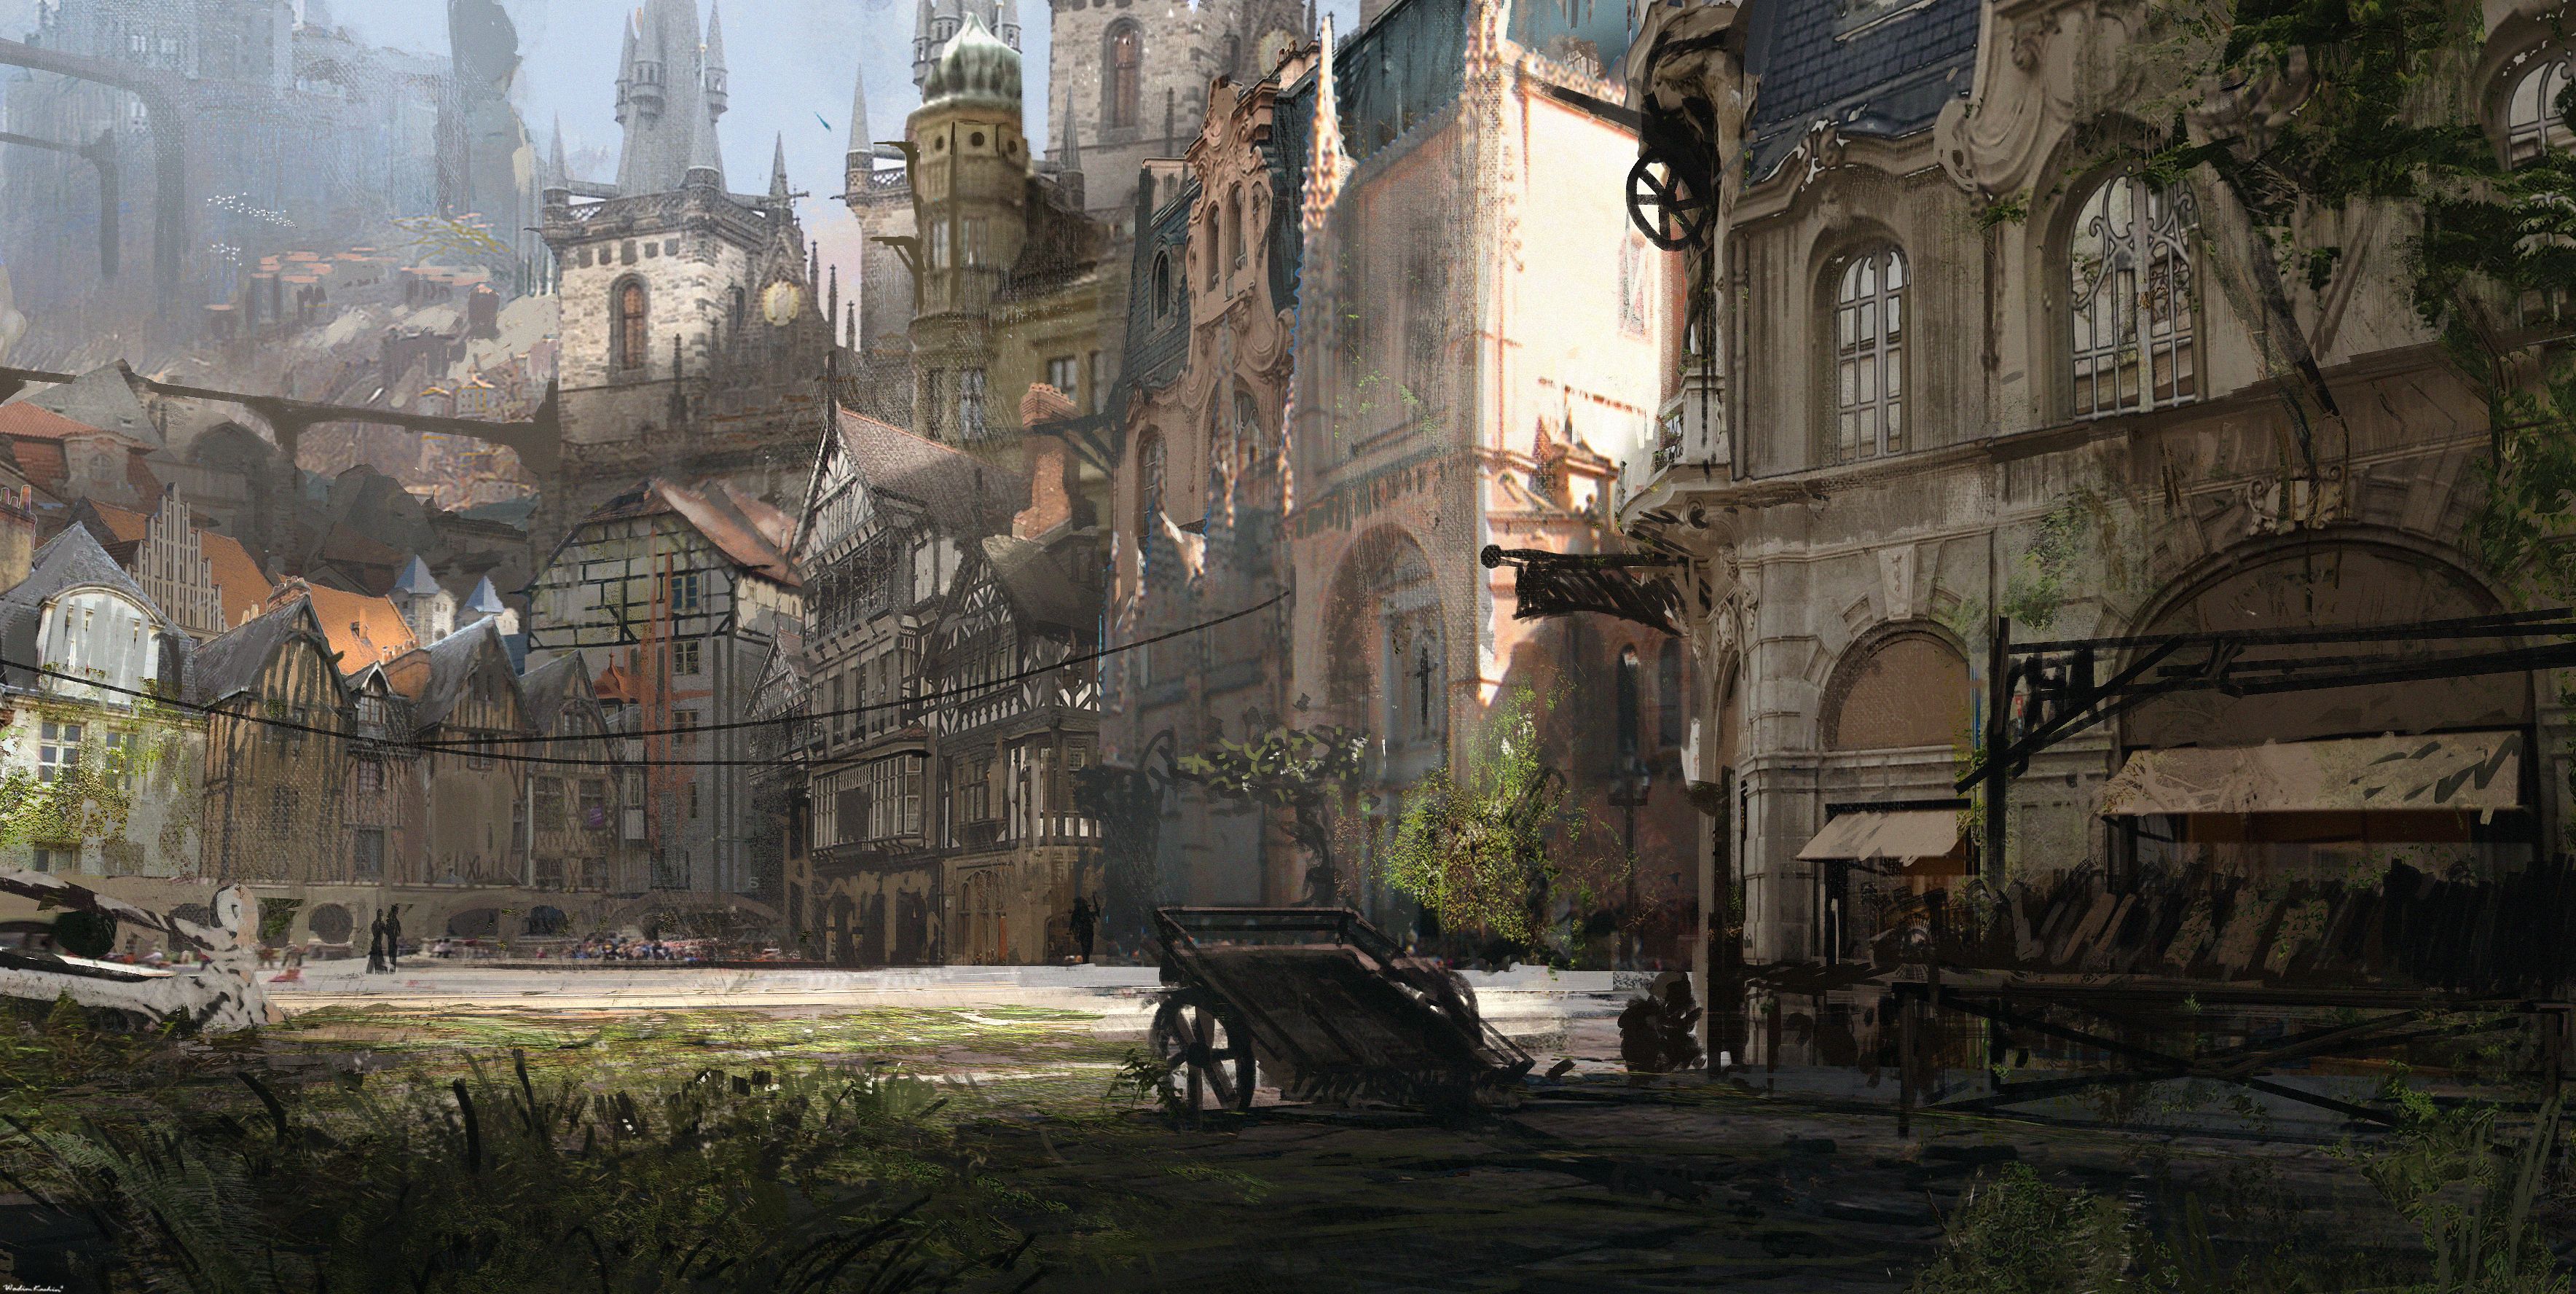 Medieval City Wallpaper Free Medieval City Background